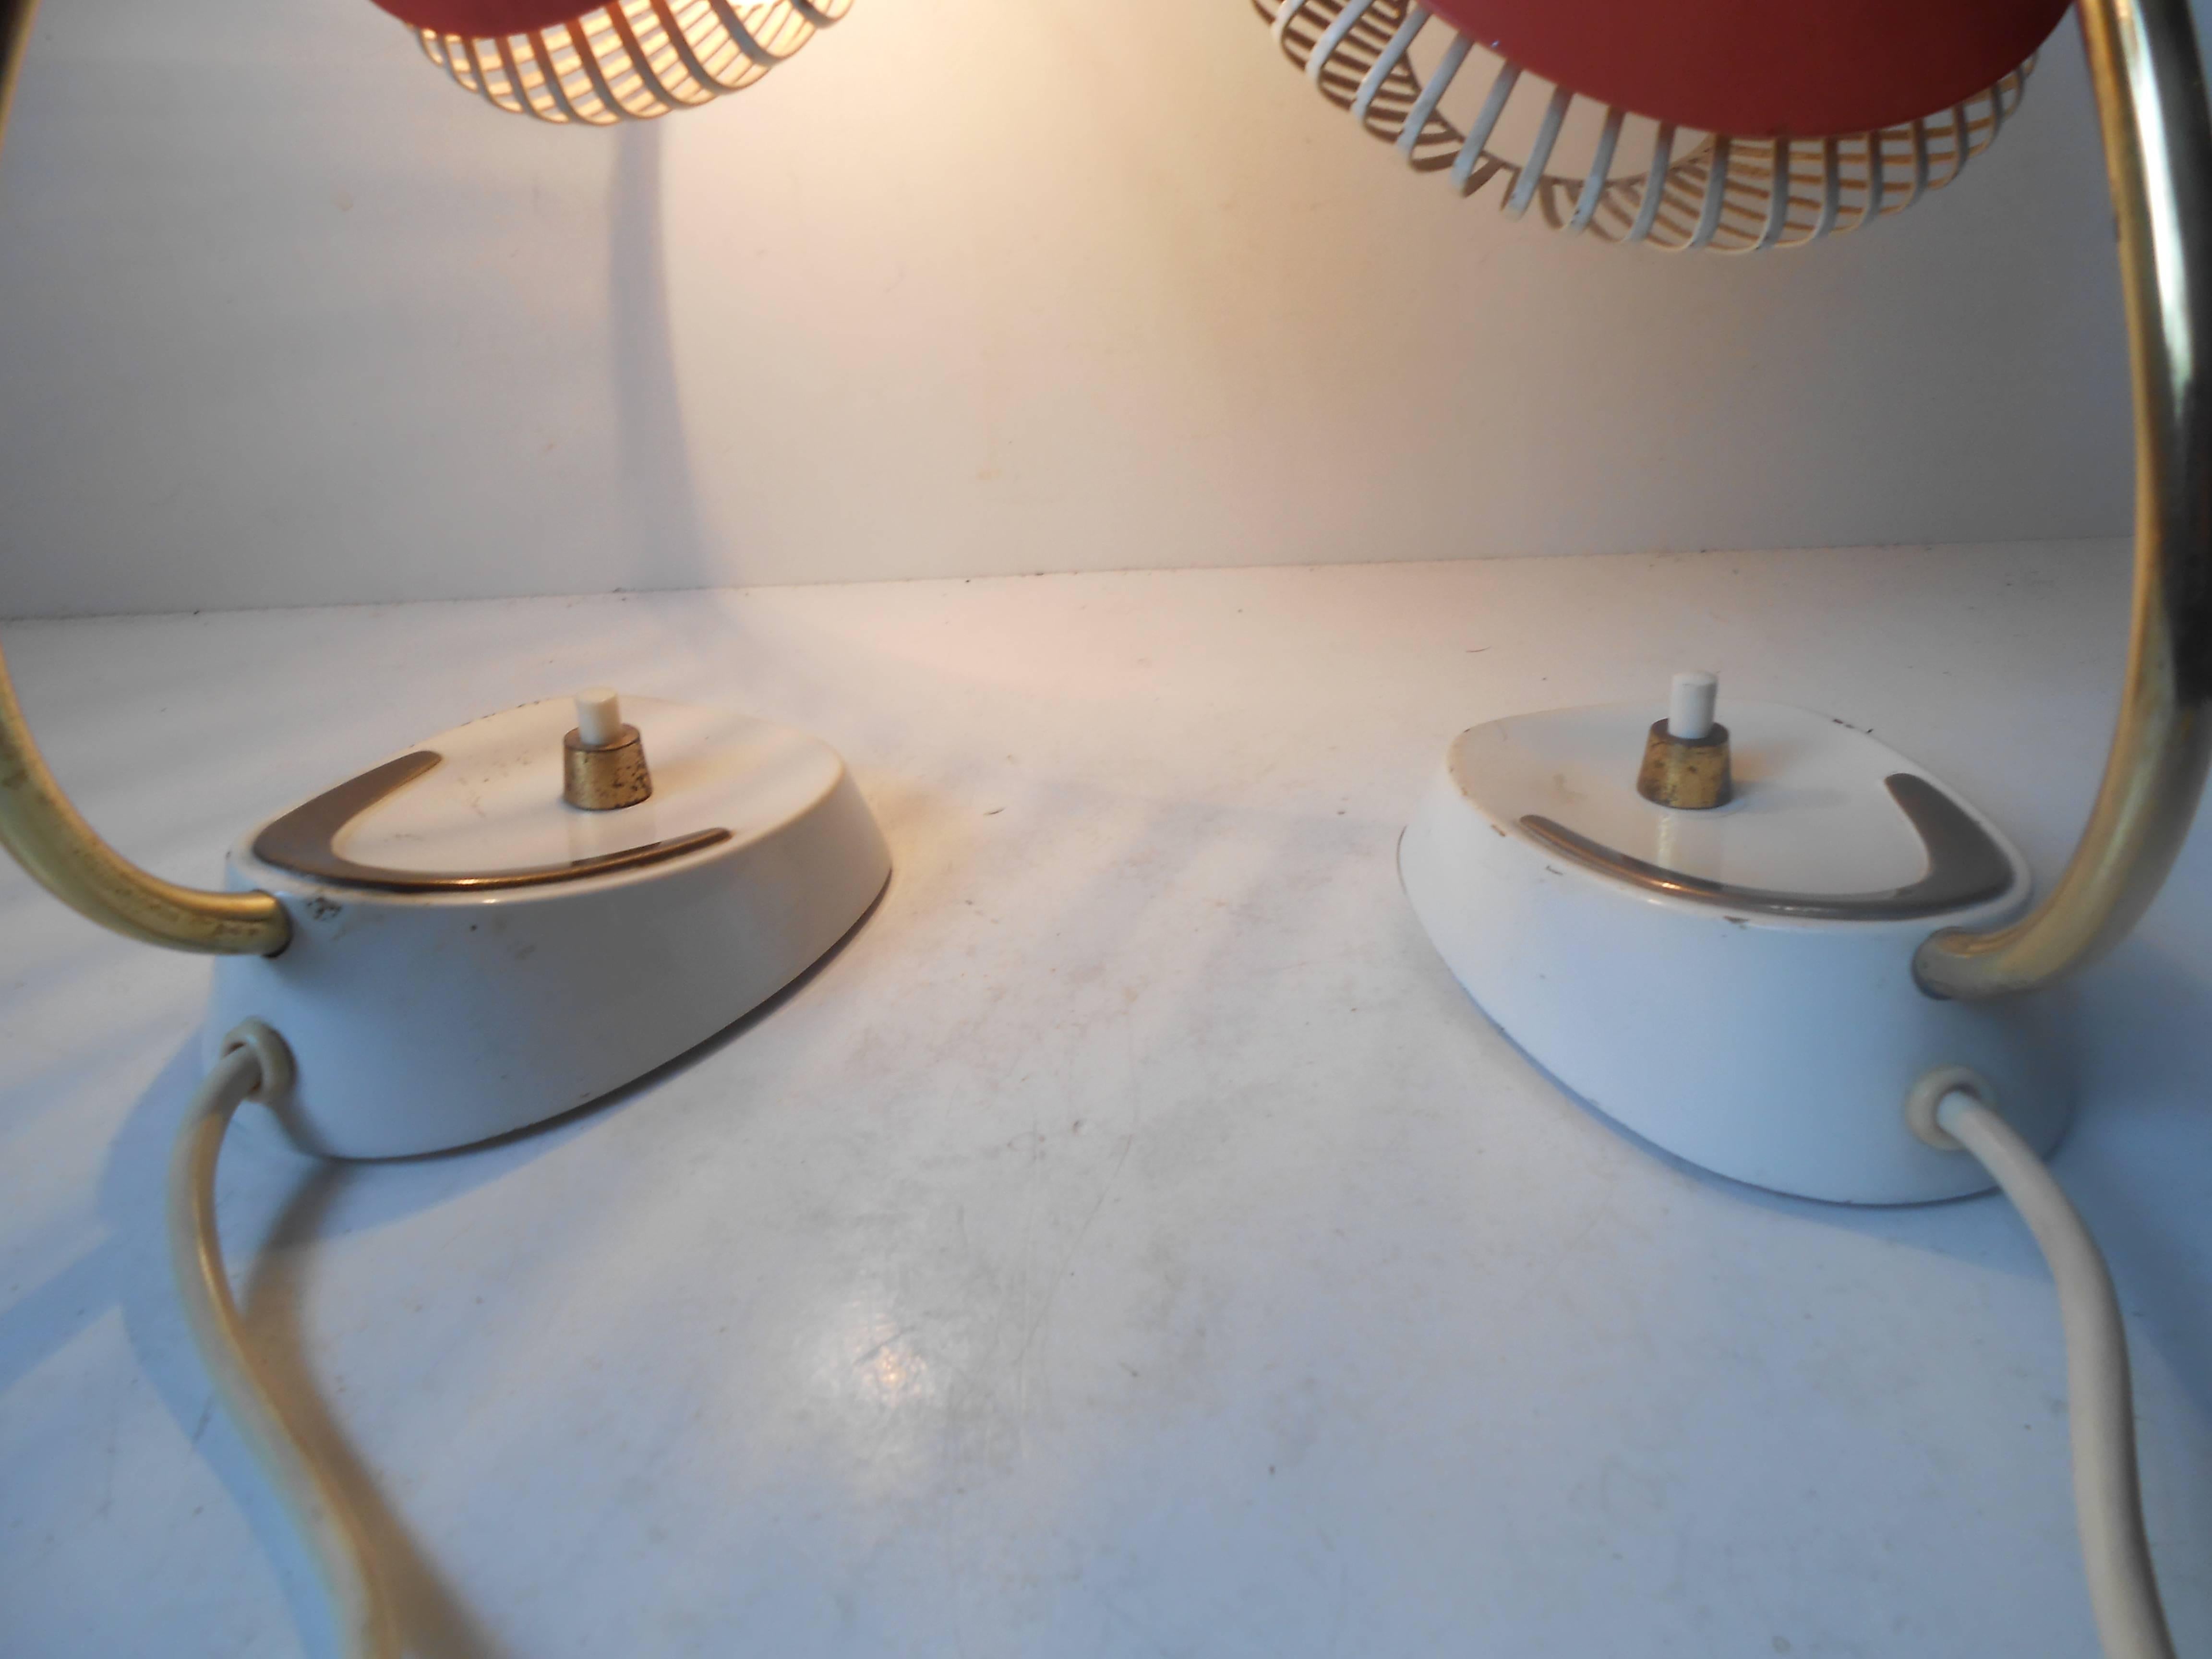 Mid-20th Century Pair of Small Italian Modern Bedside Table Lamps with Wire Mesh, Stilnovo Era